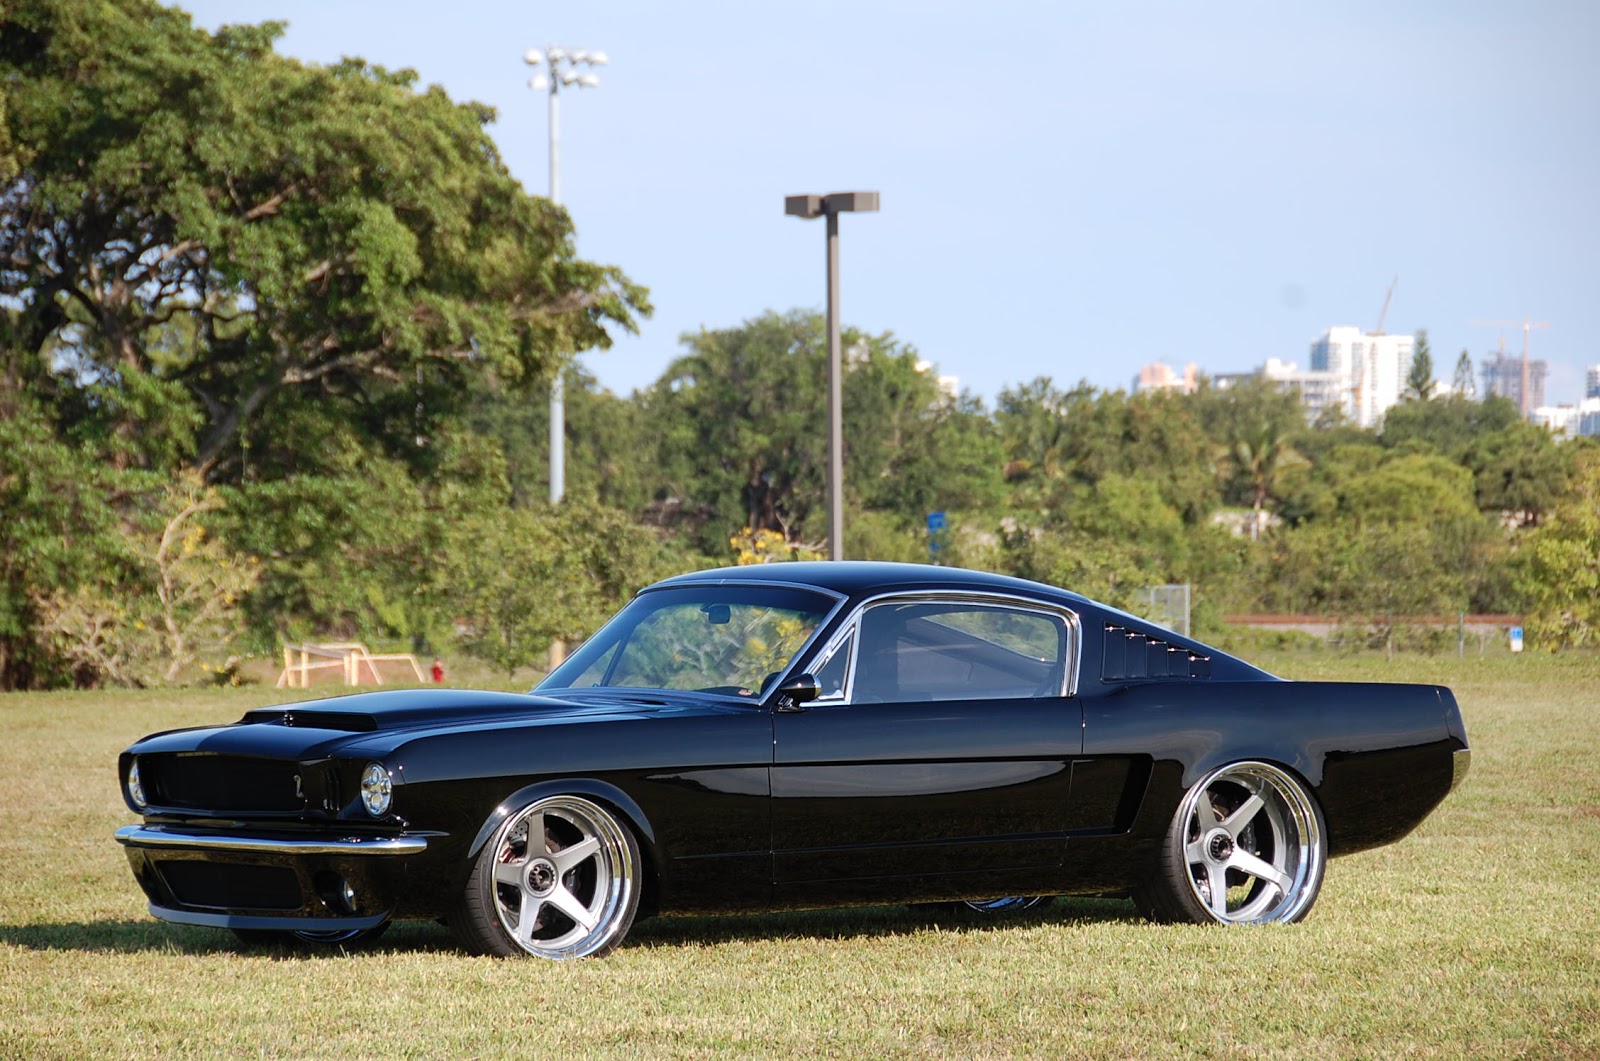 1965 Ford Mustang Fastback Pro Touring For Sale American Rank O Man